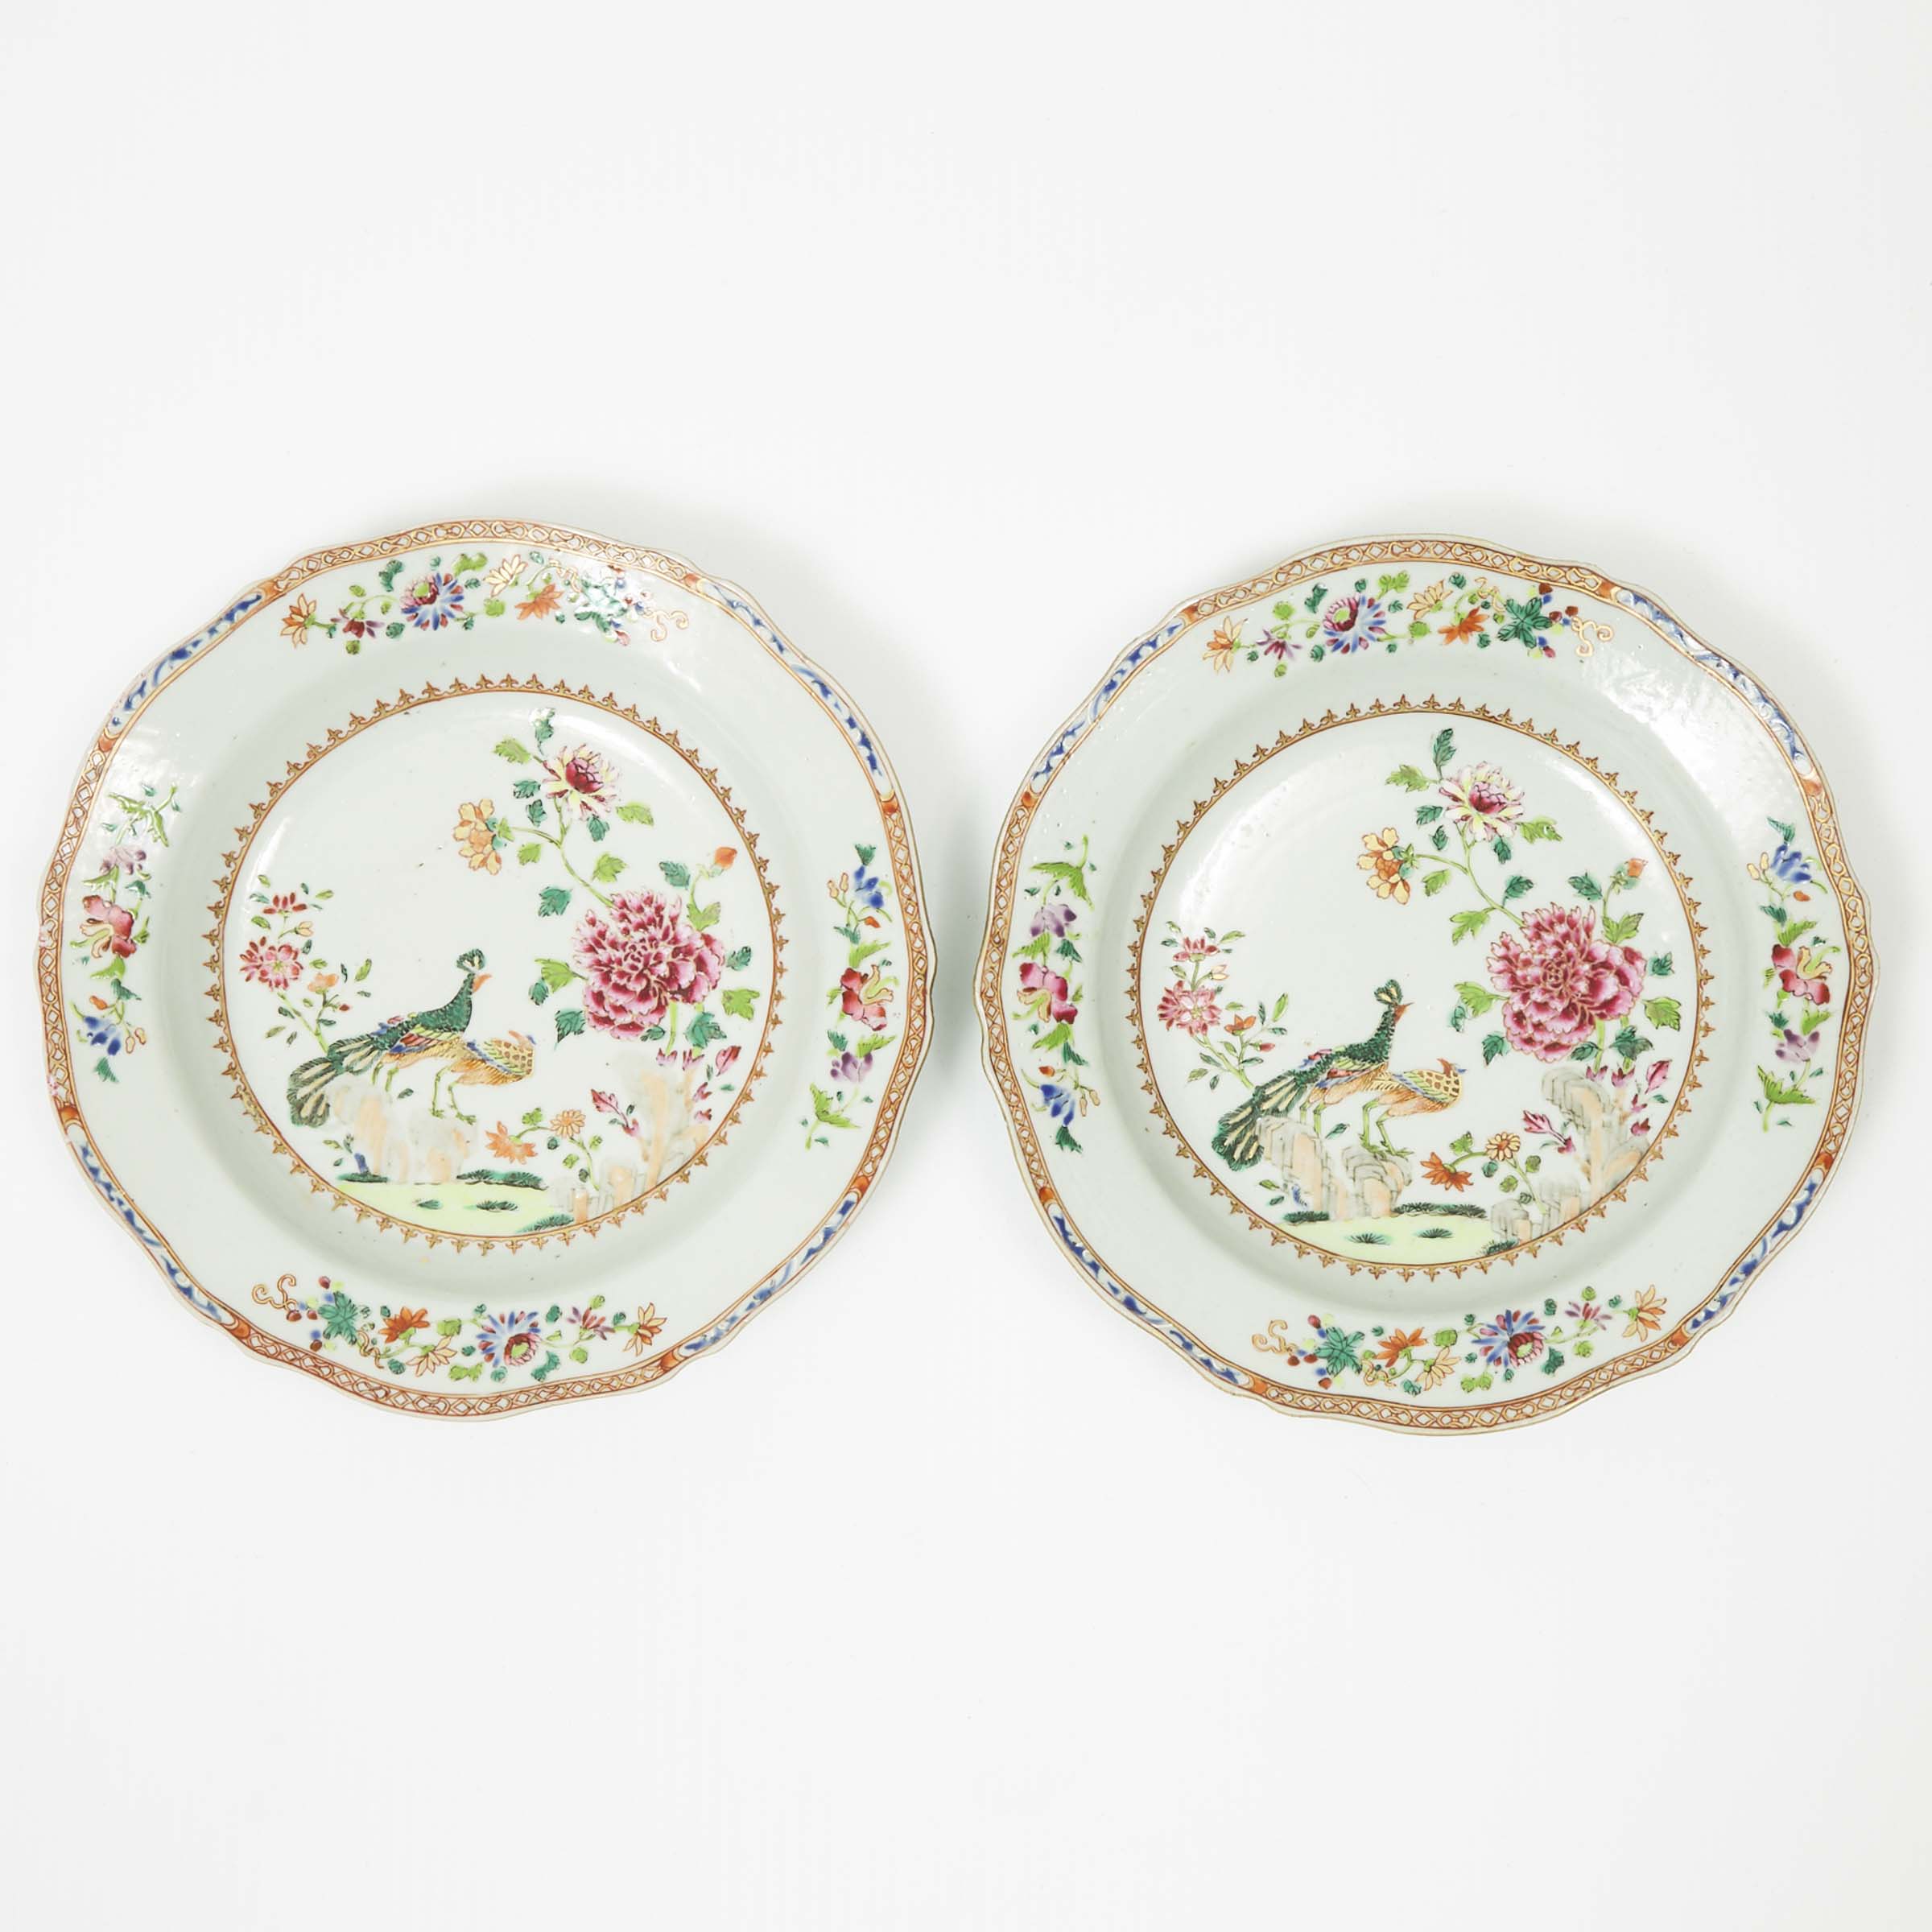 A Pair of Famille Rose Lobed Plates with Peacocks, 18th Century